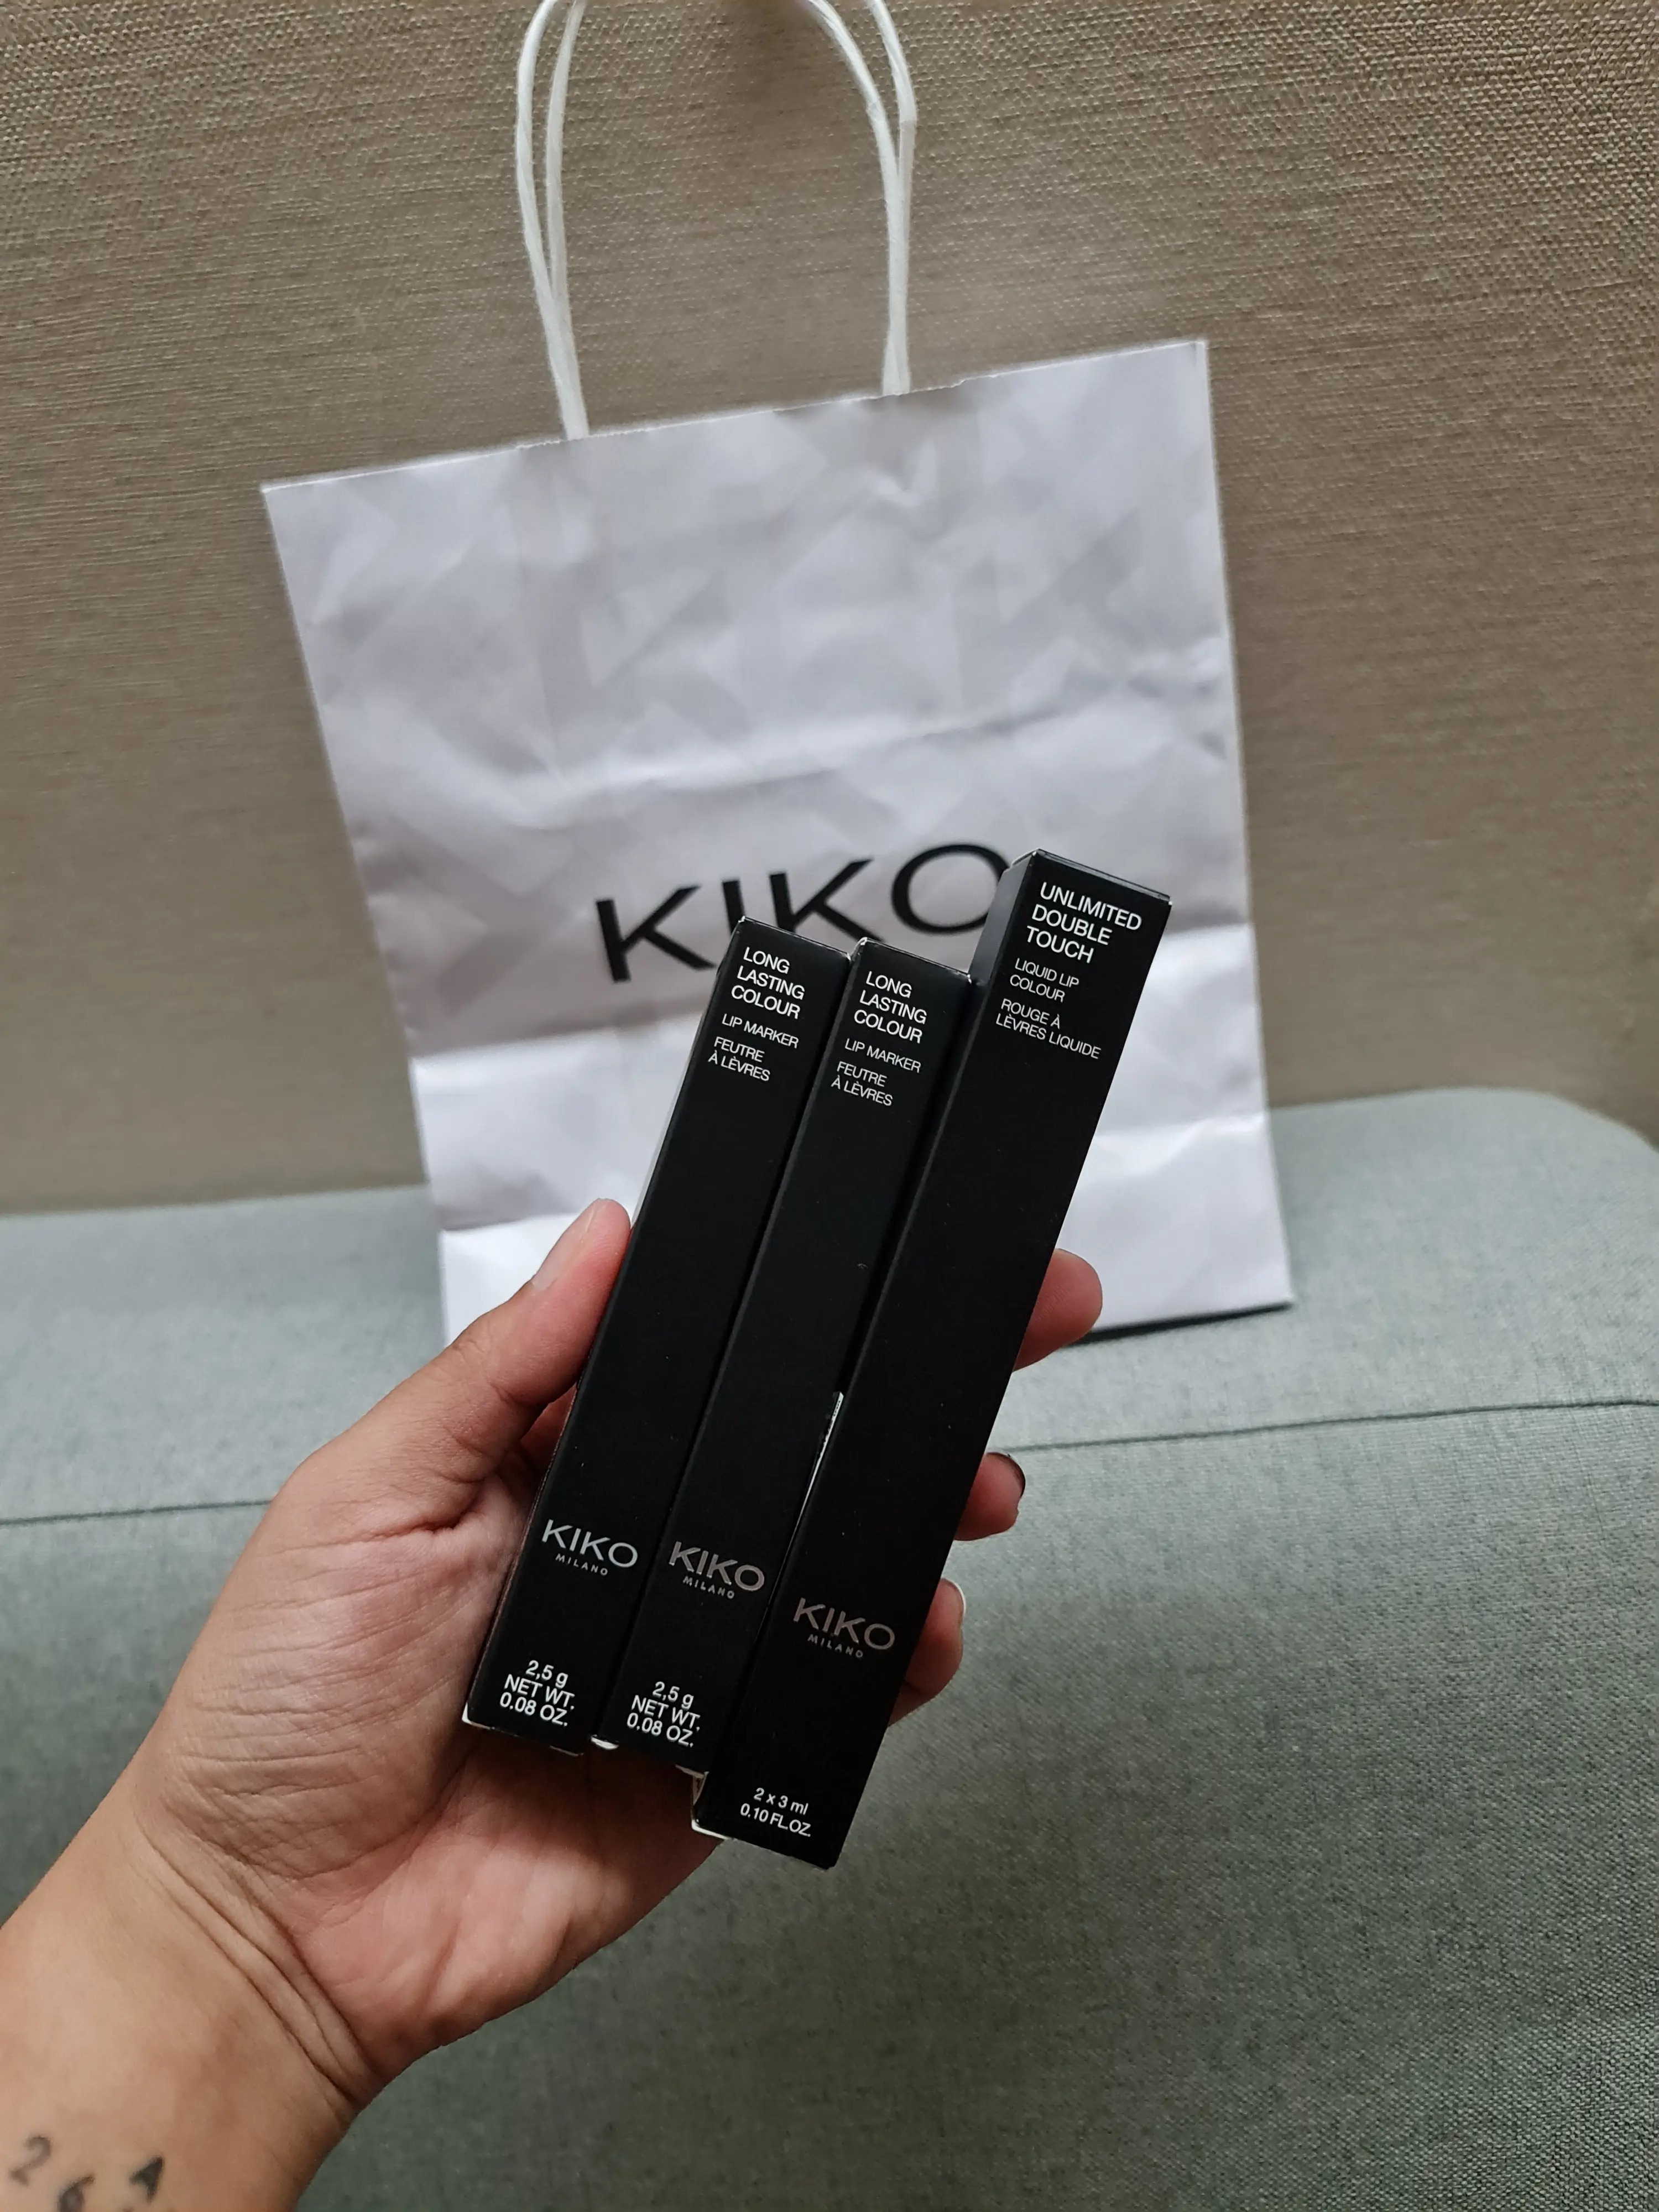 Injection now 1! KIKO review Lipstick applied and not attached mask, Gallery posted by girlfromvenus